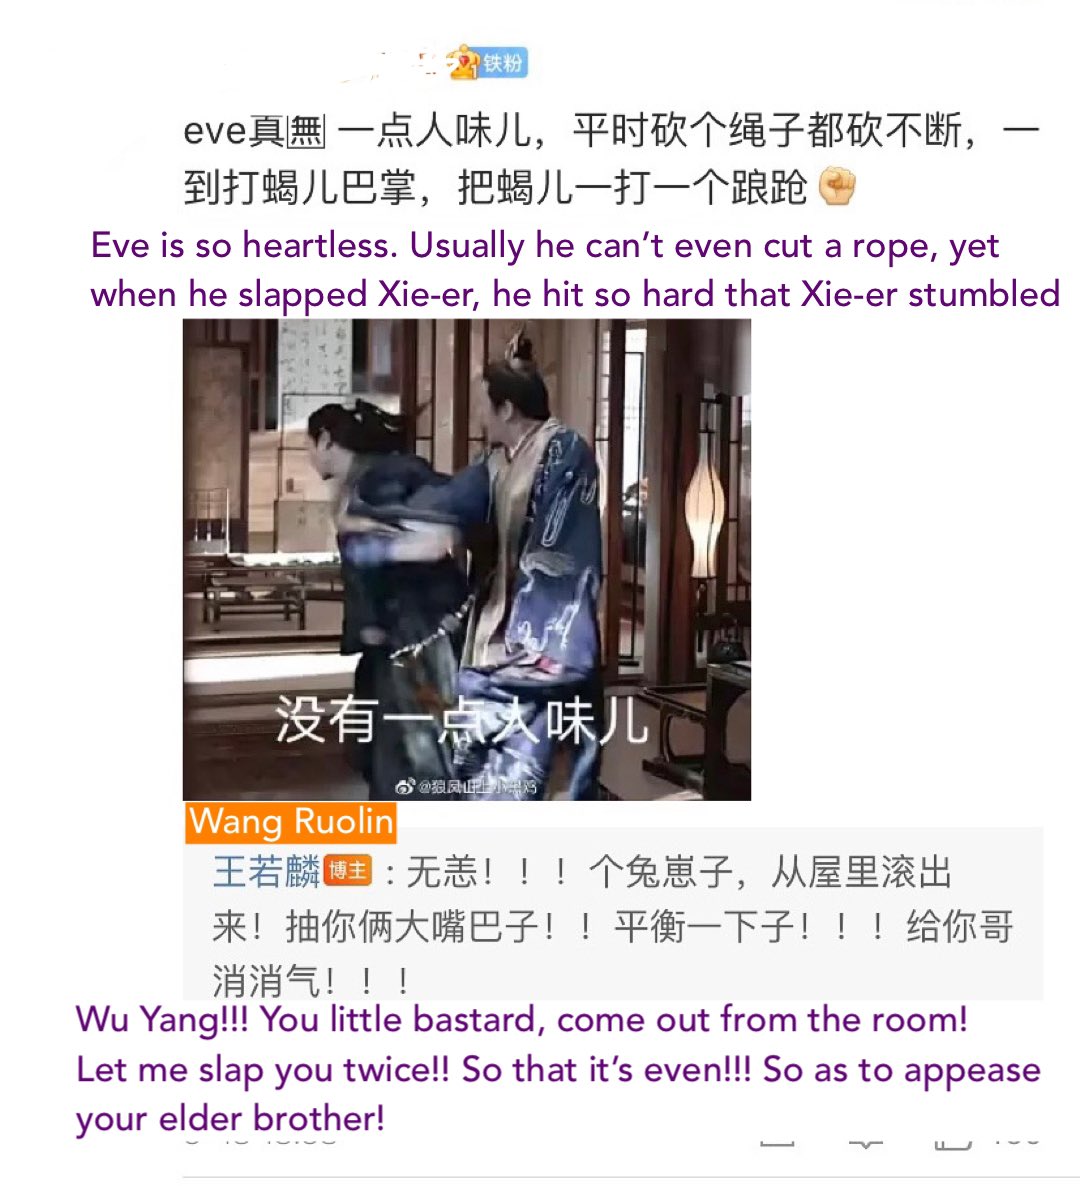 This is from the comments section of their posts on 18 Mar (scroll up this thread to view OG post)Zhao Jing can’t even cut rope = ep 5 of Word of HonorWu Yang = the other godson, the one who gave Zhao Jing a manicure